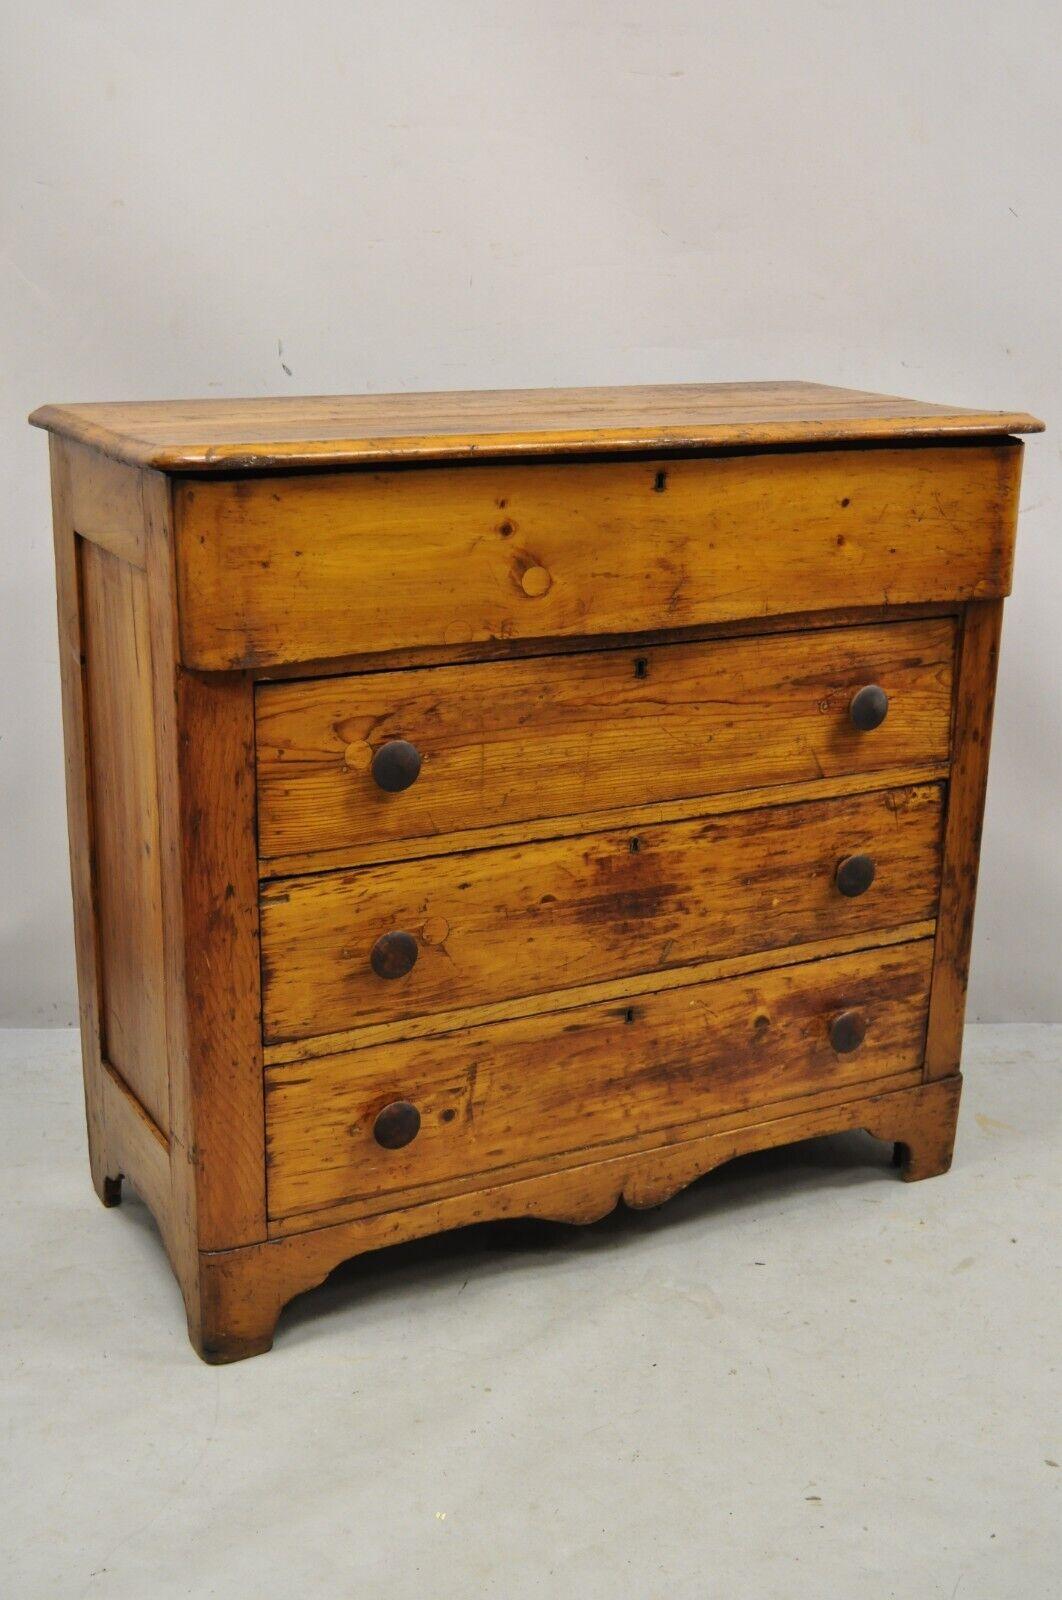 19th Century Antique American Primitive Colonial Pine 4 drawer chest of drawers dresser. Item features solid wood construction, beautiful wood grain, distressed finish, no key, but unlocked, 4 dovetailed drawers, very nice antique item, quality